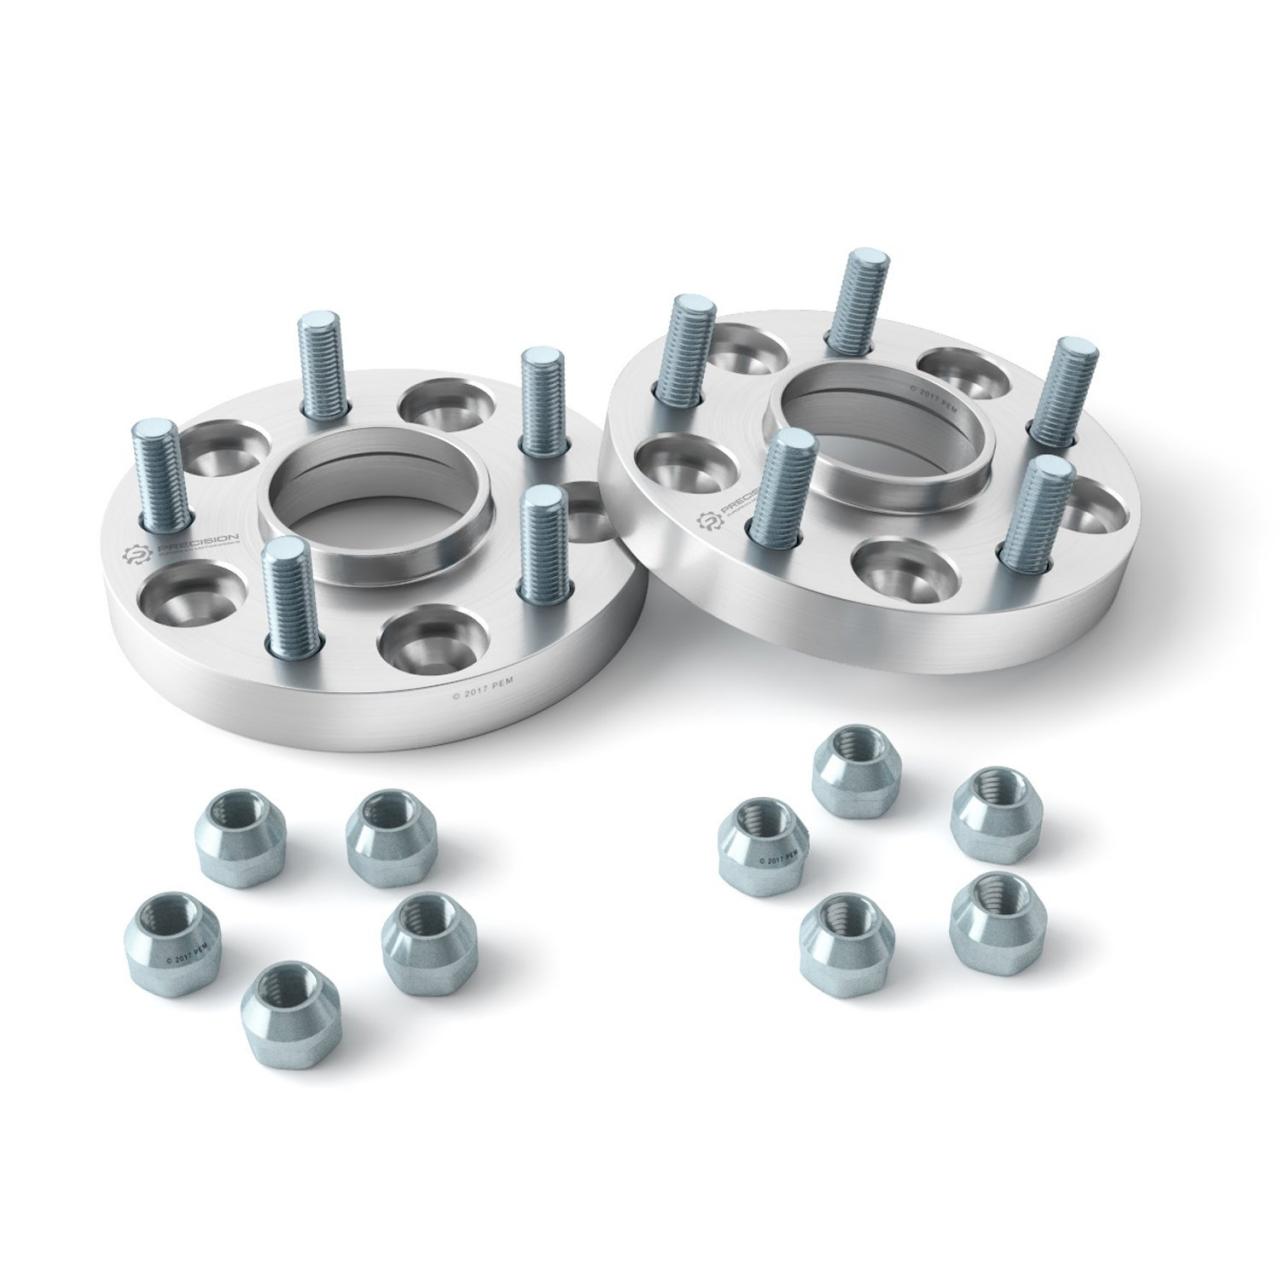 RockTrix - 1 inch Hubcentric Wheel Adapters (Changes Bolt Pattern) Converts  5x4.5 to 5x5 (71.5mm Bore, 1/2x20 Studs…- Buy Online in Antigua and Barbuda  at antigua.desertcart.com. ProductId : 79820474.